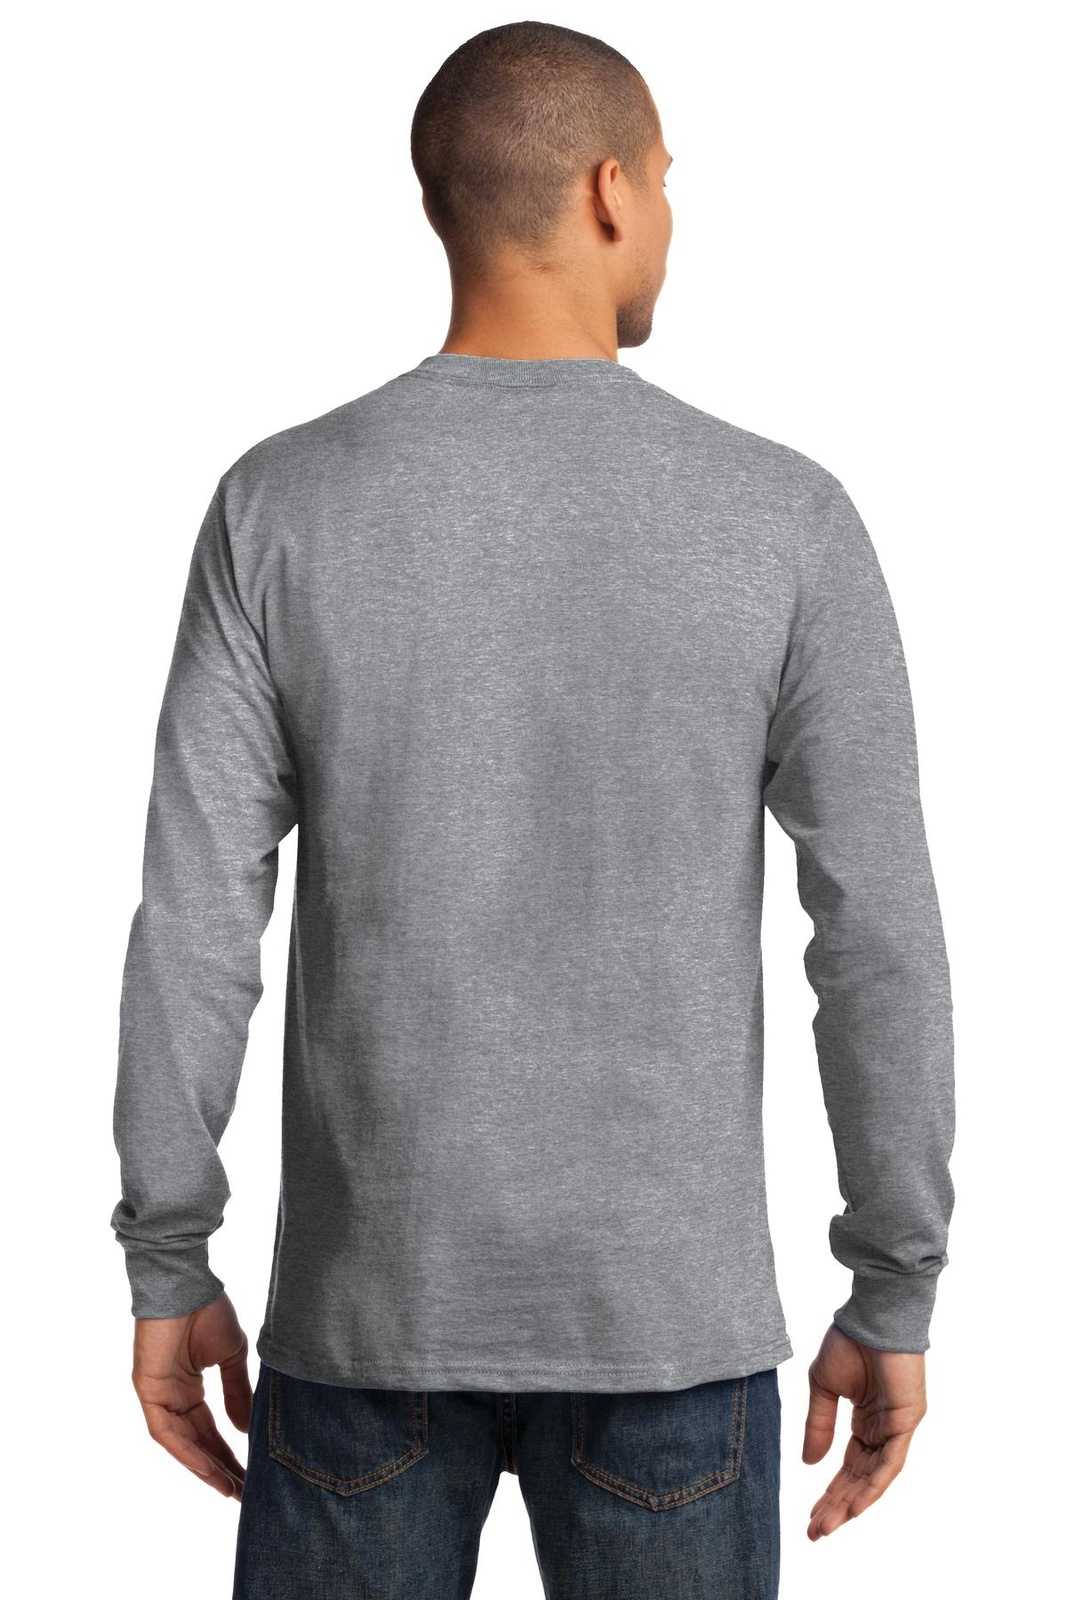 Port & Company PC61LS Long Sleeve Essential Tee - Athletic Heather - HIT a Double - 1